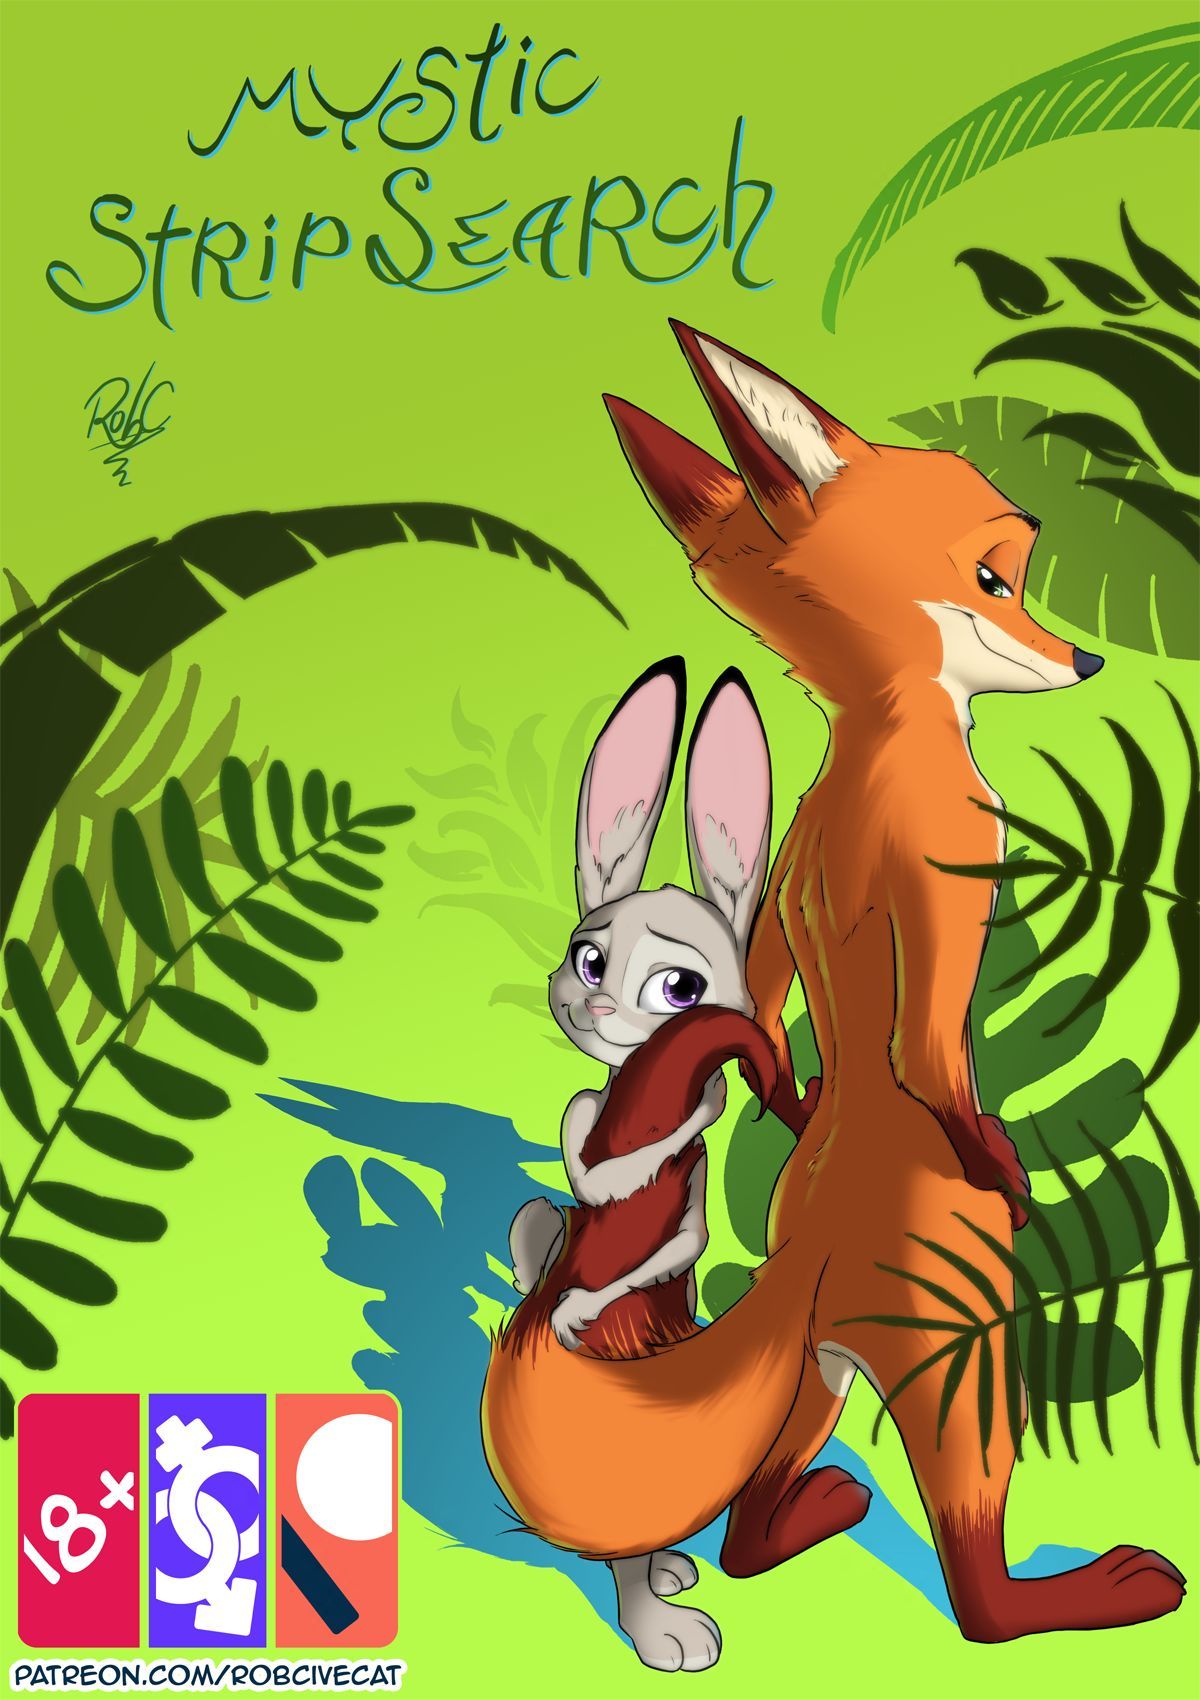 [RobCivecat] Mystic Strip Search (Zootopia) [Ongoing] 1